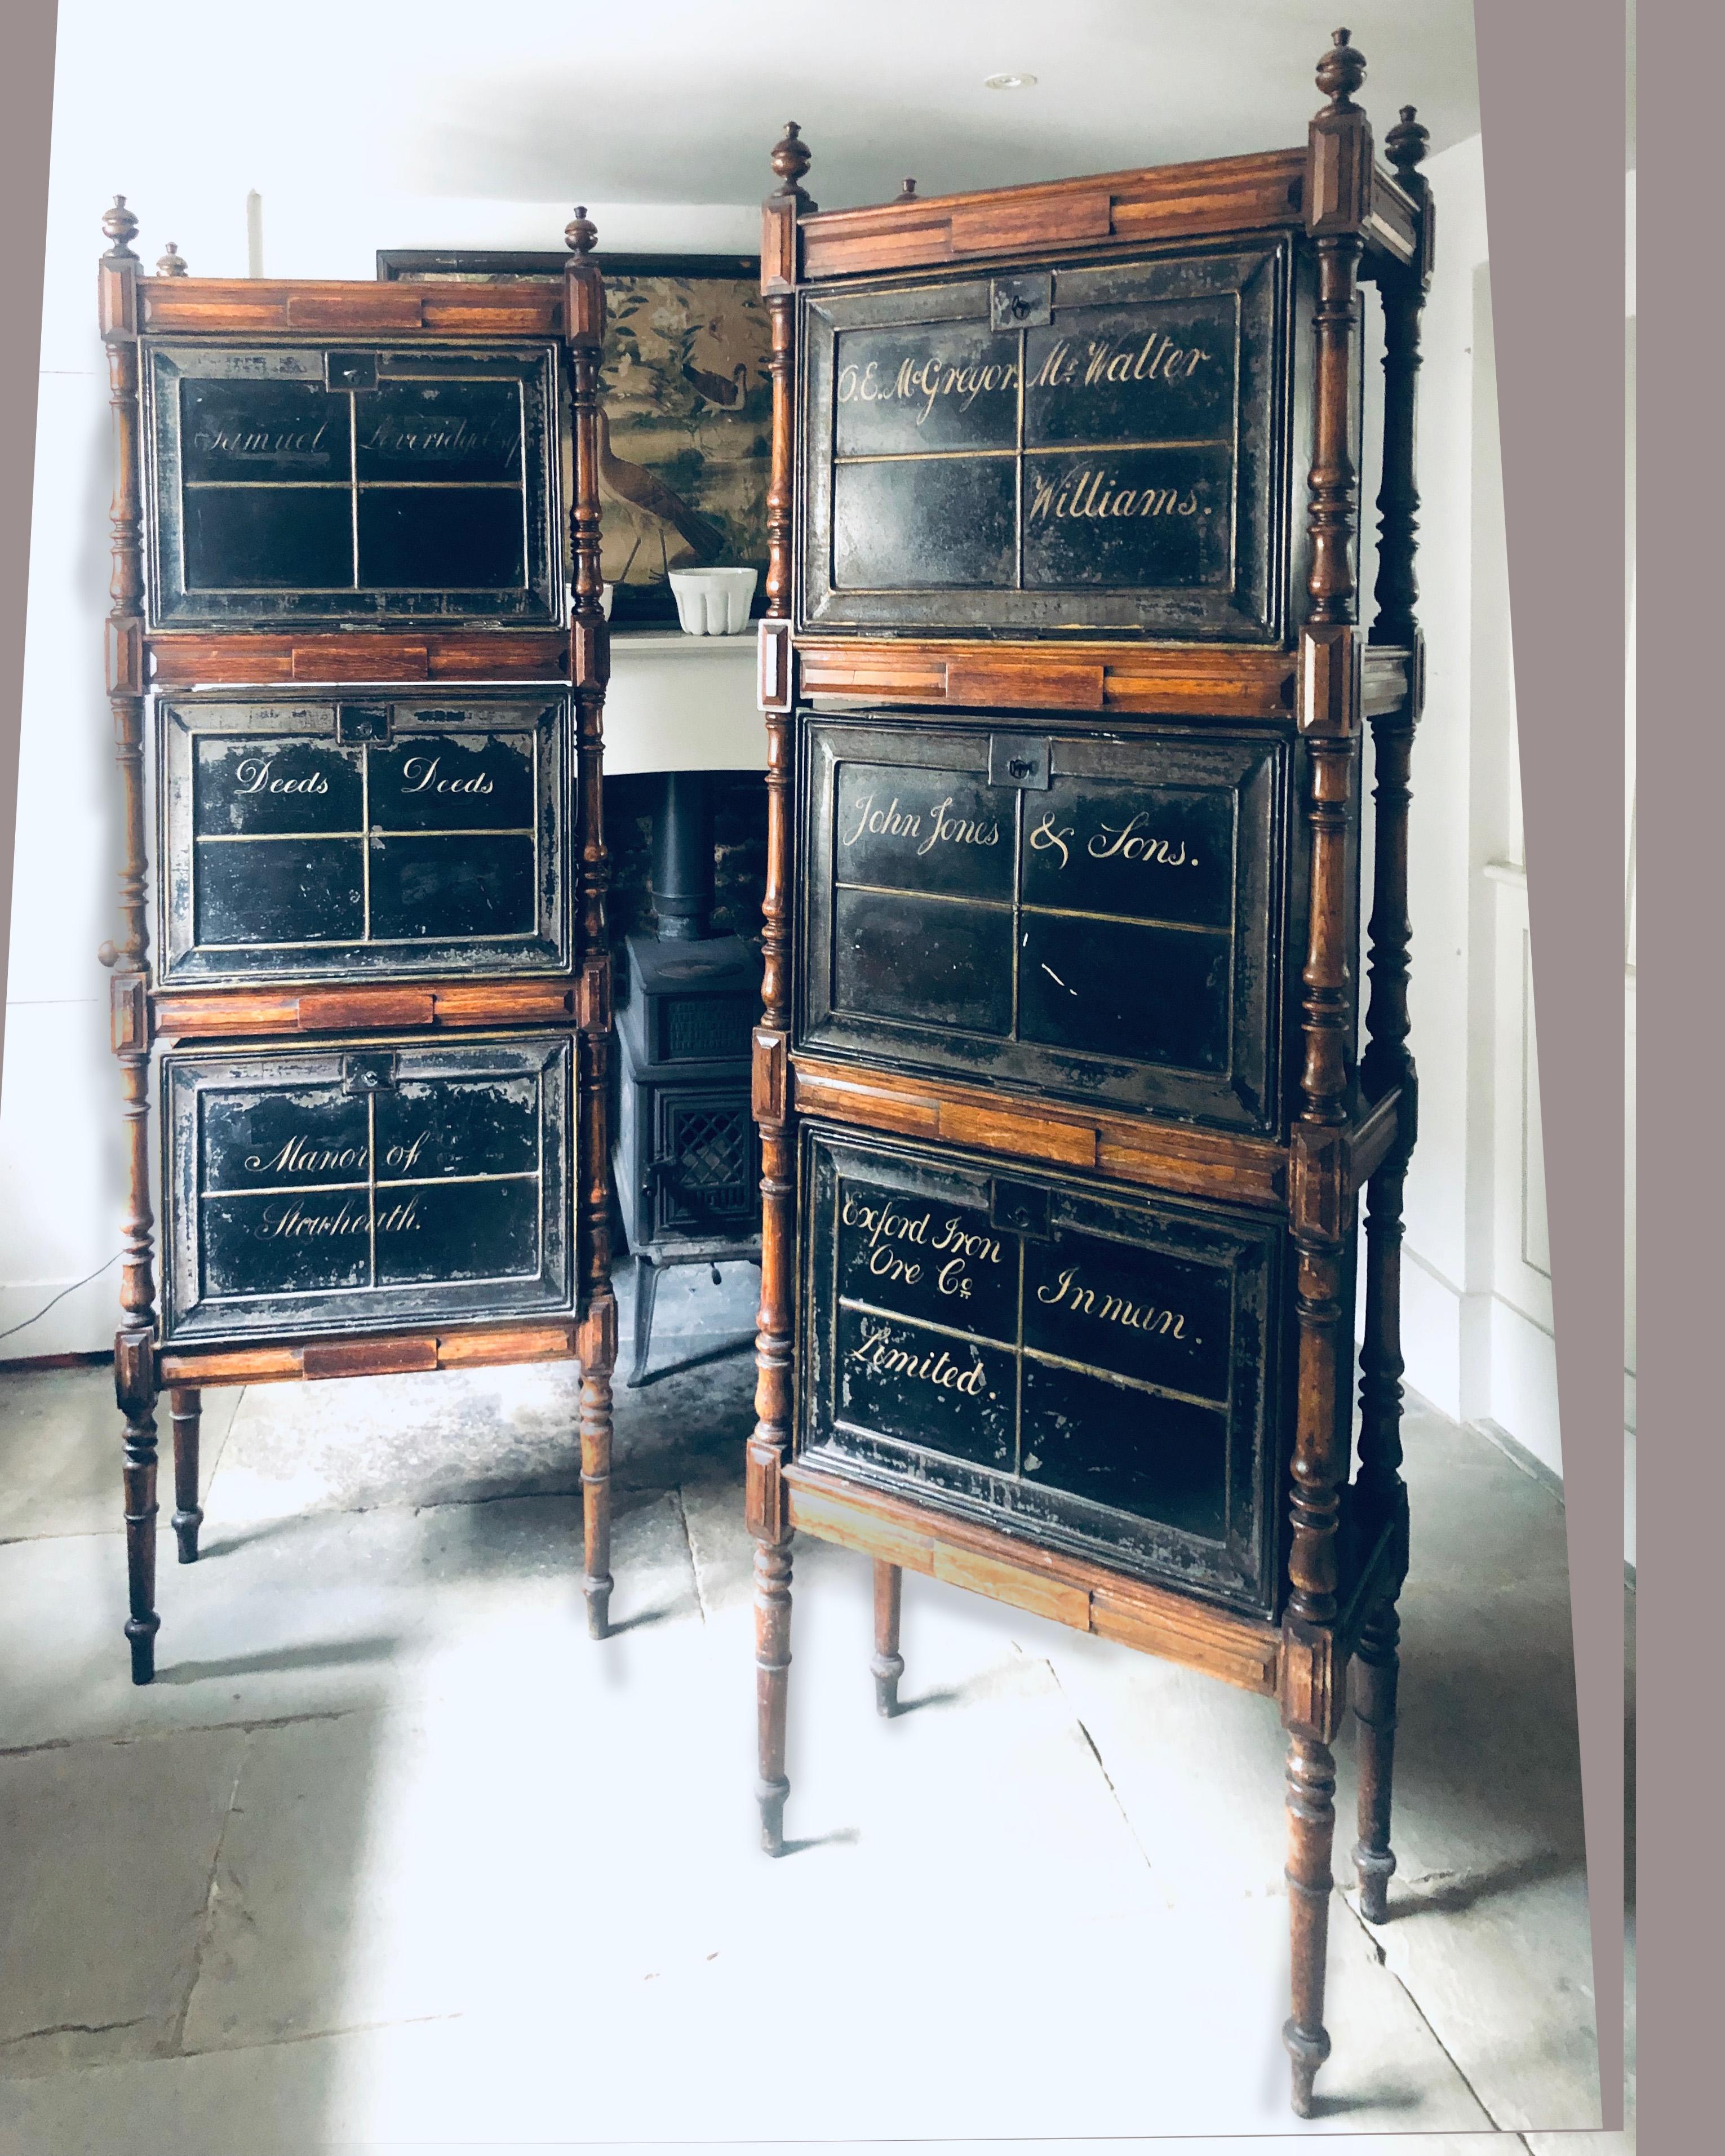 A pair of Victorian turned oak each frame with three black enamelled deed boxes
Each deed box with side carrying handles hinged fall front and working locks
Almost certainly originally part of the furnishings of a prestigious bank or lawyers